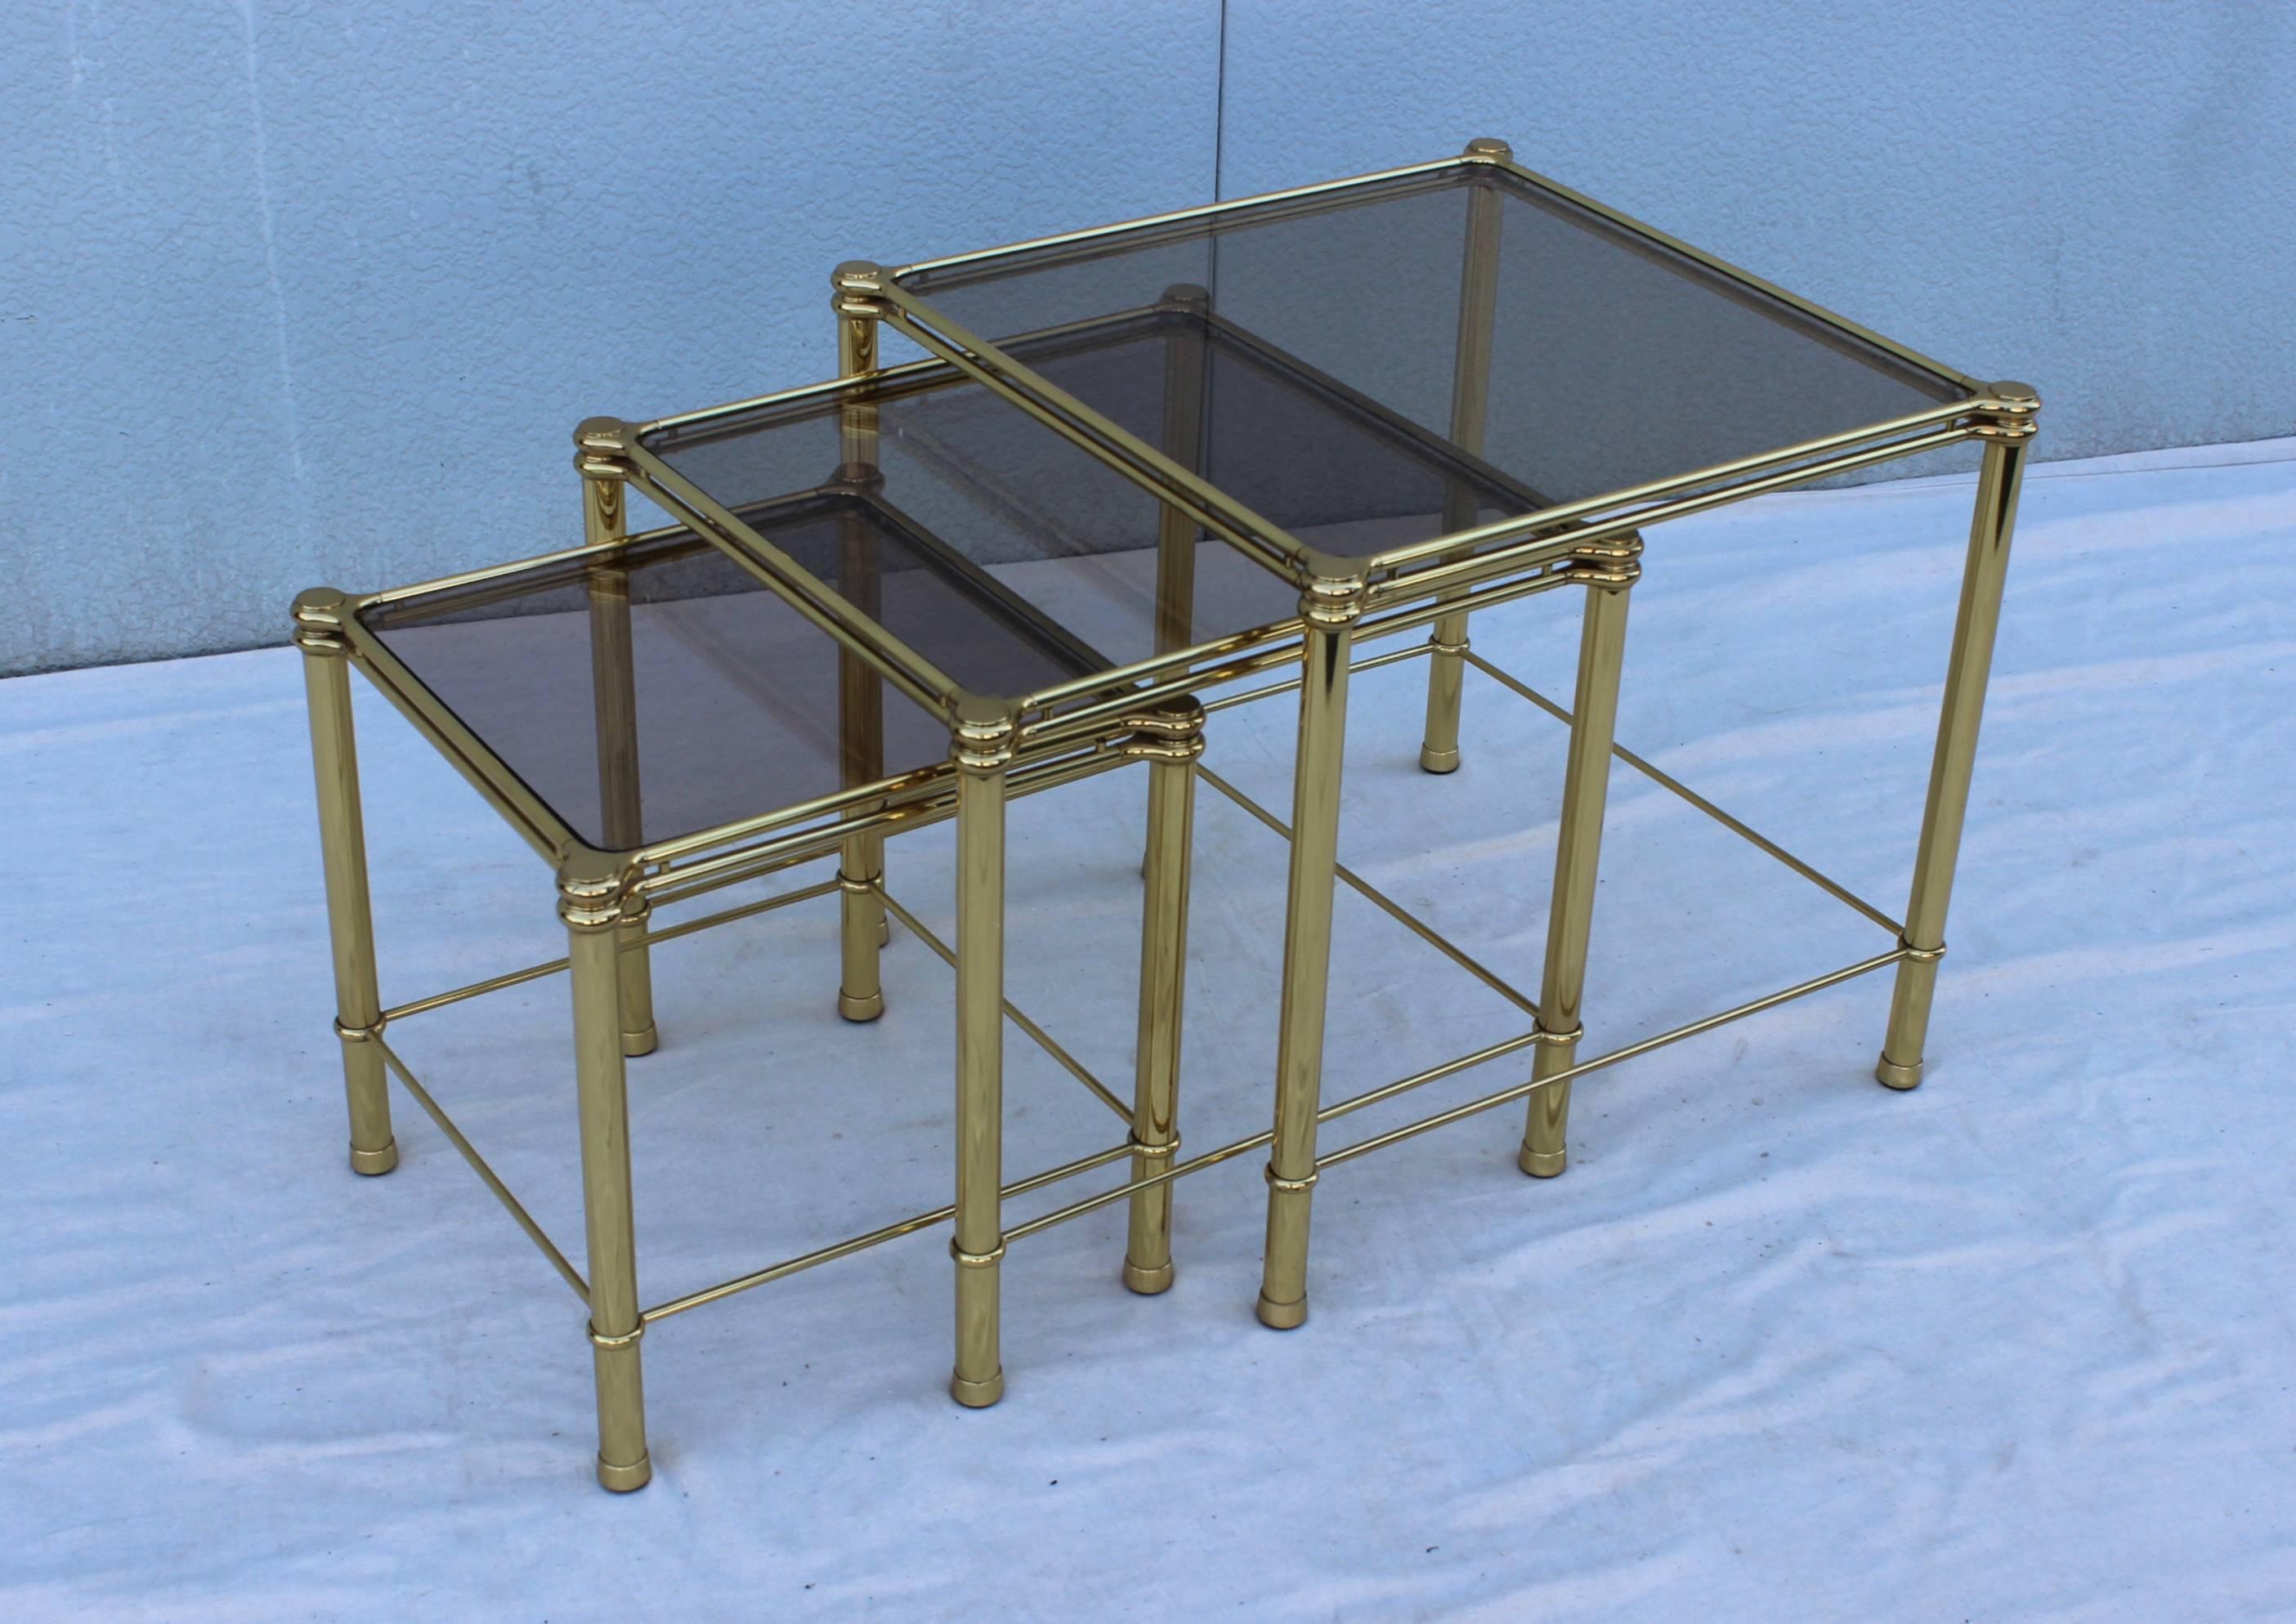 1960s modern Italian brass and glass nesting tables, in vintage original condition with minor wear and patina due to age and use, these pieces are well made and heavy. 

Medium table width/depth 18'' height 17''.
Small table width/depth 15'' height